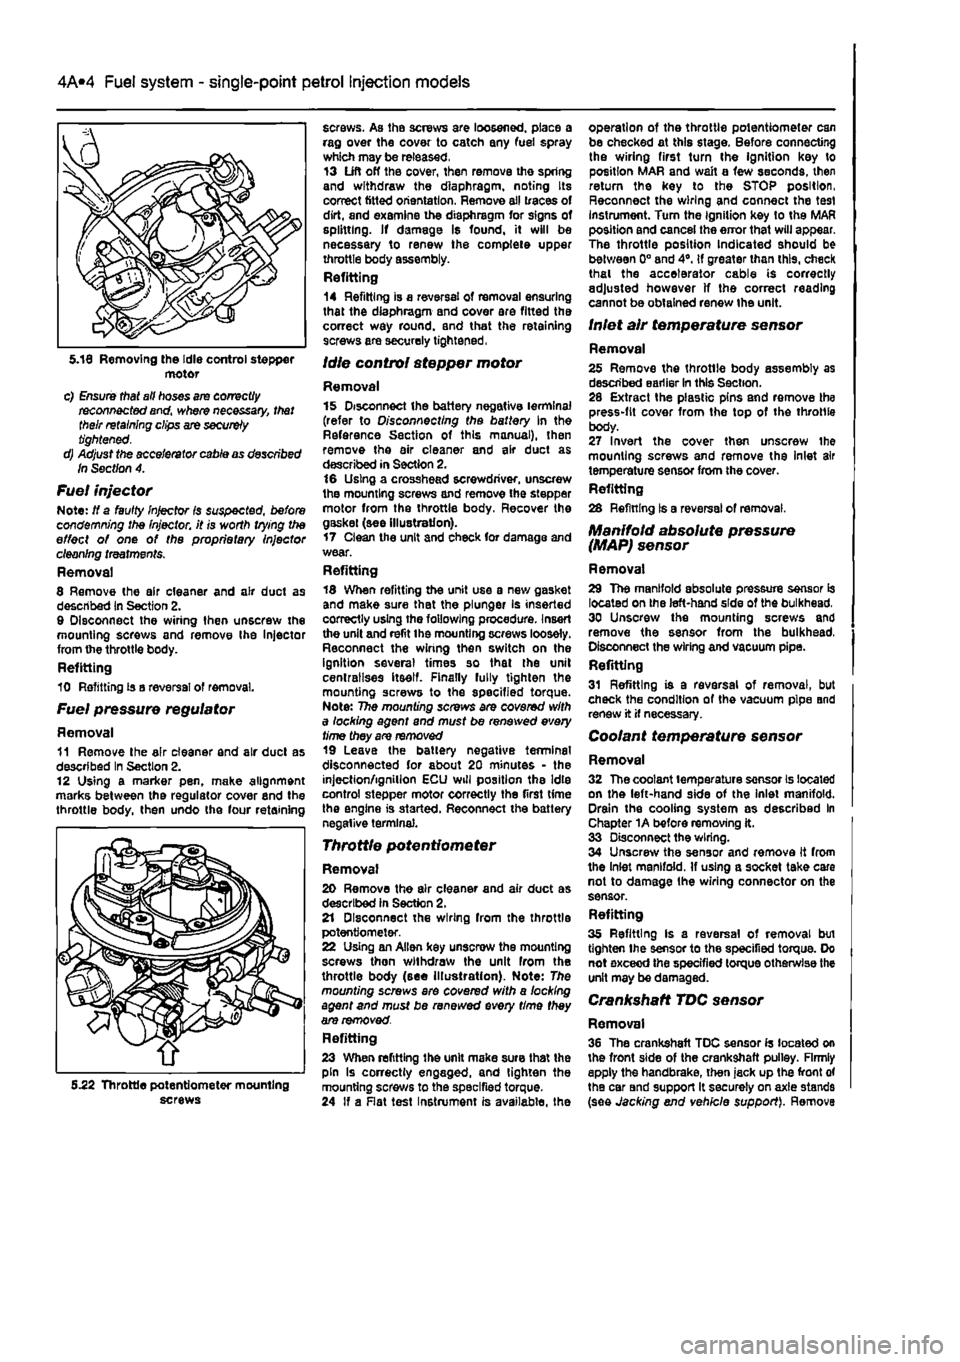 FIAT PUNTO 1998 176 / 1.G Service Manual 
4A*2 Fuel system - single-point petrol Injection models 
motor c) Ensure that all hoses are correctly reconnected and, where necessary, that their retaining clips are securely tightened. d) Adjust th